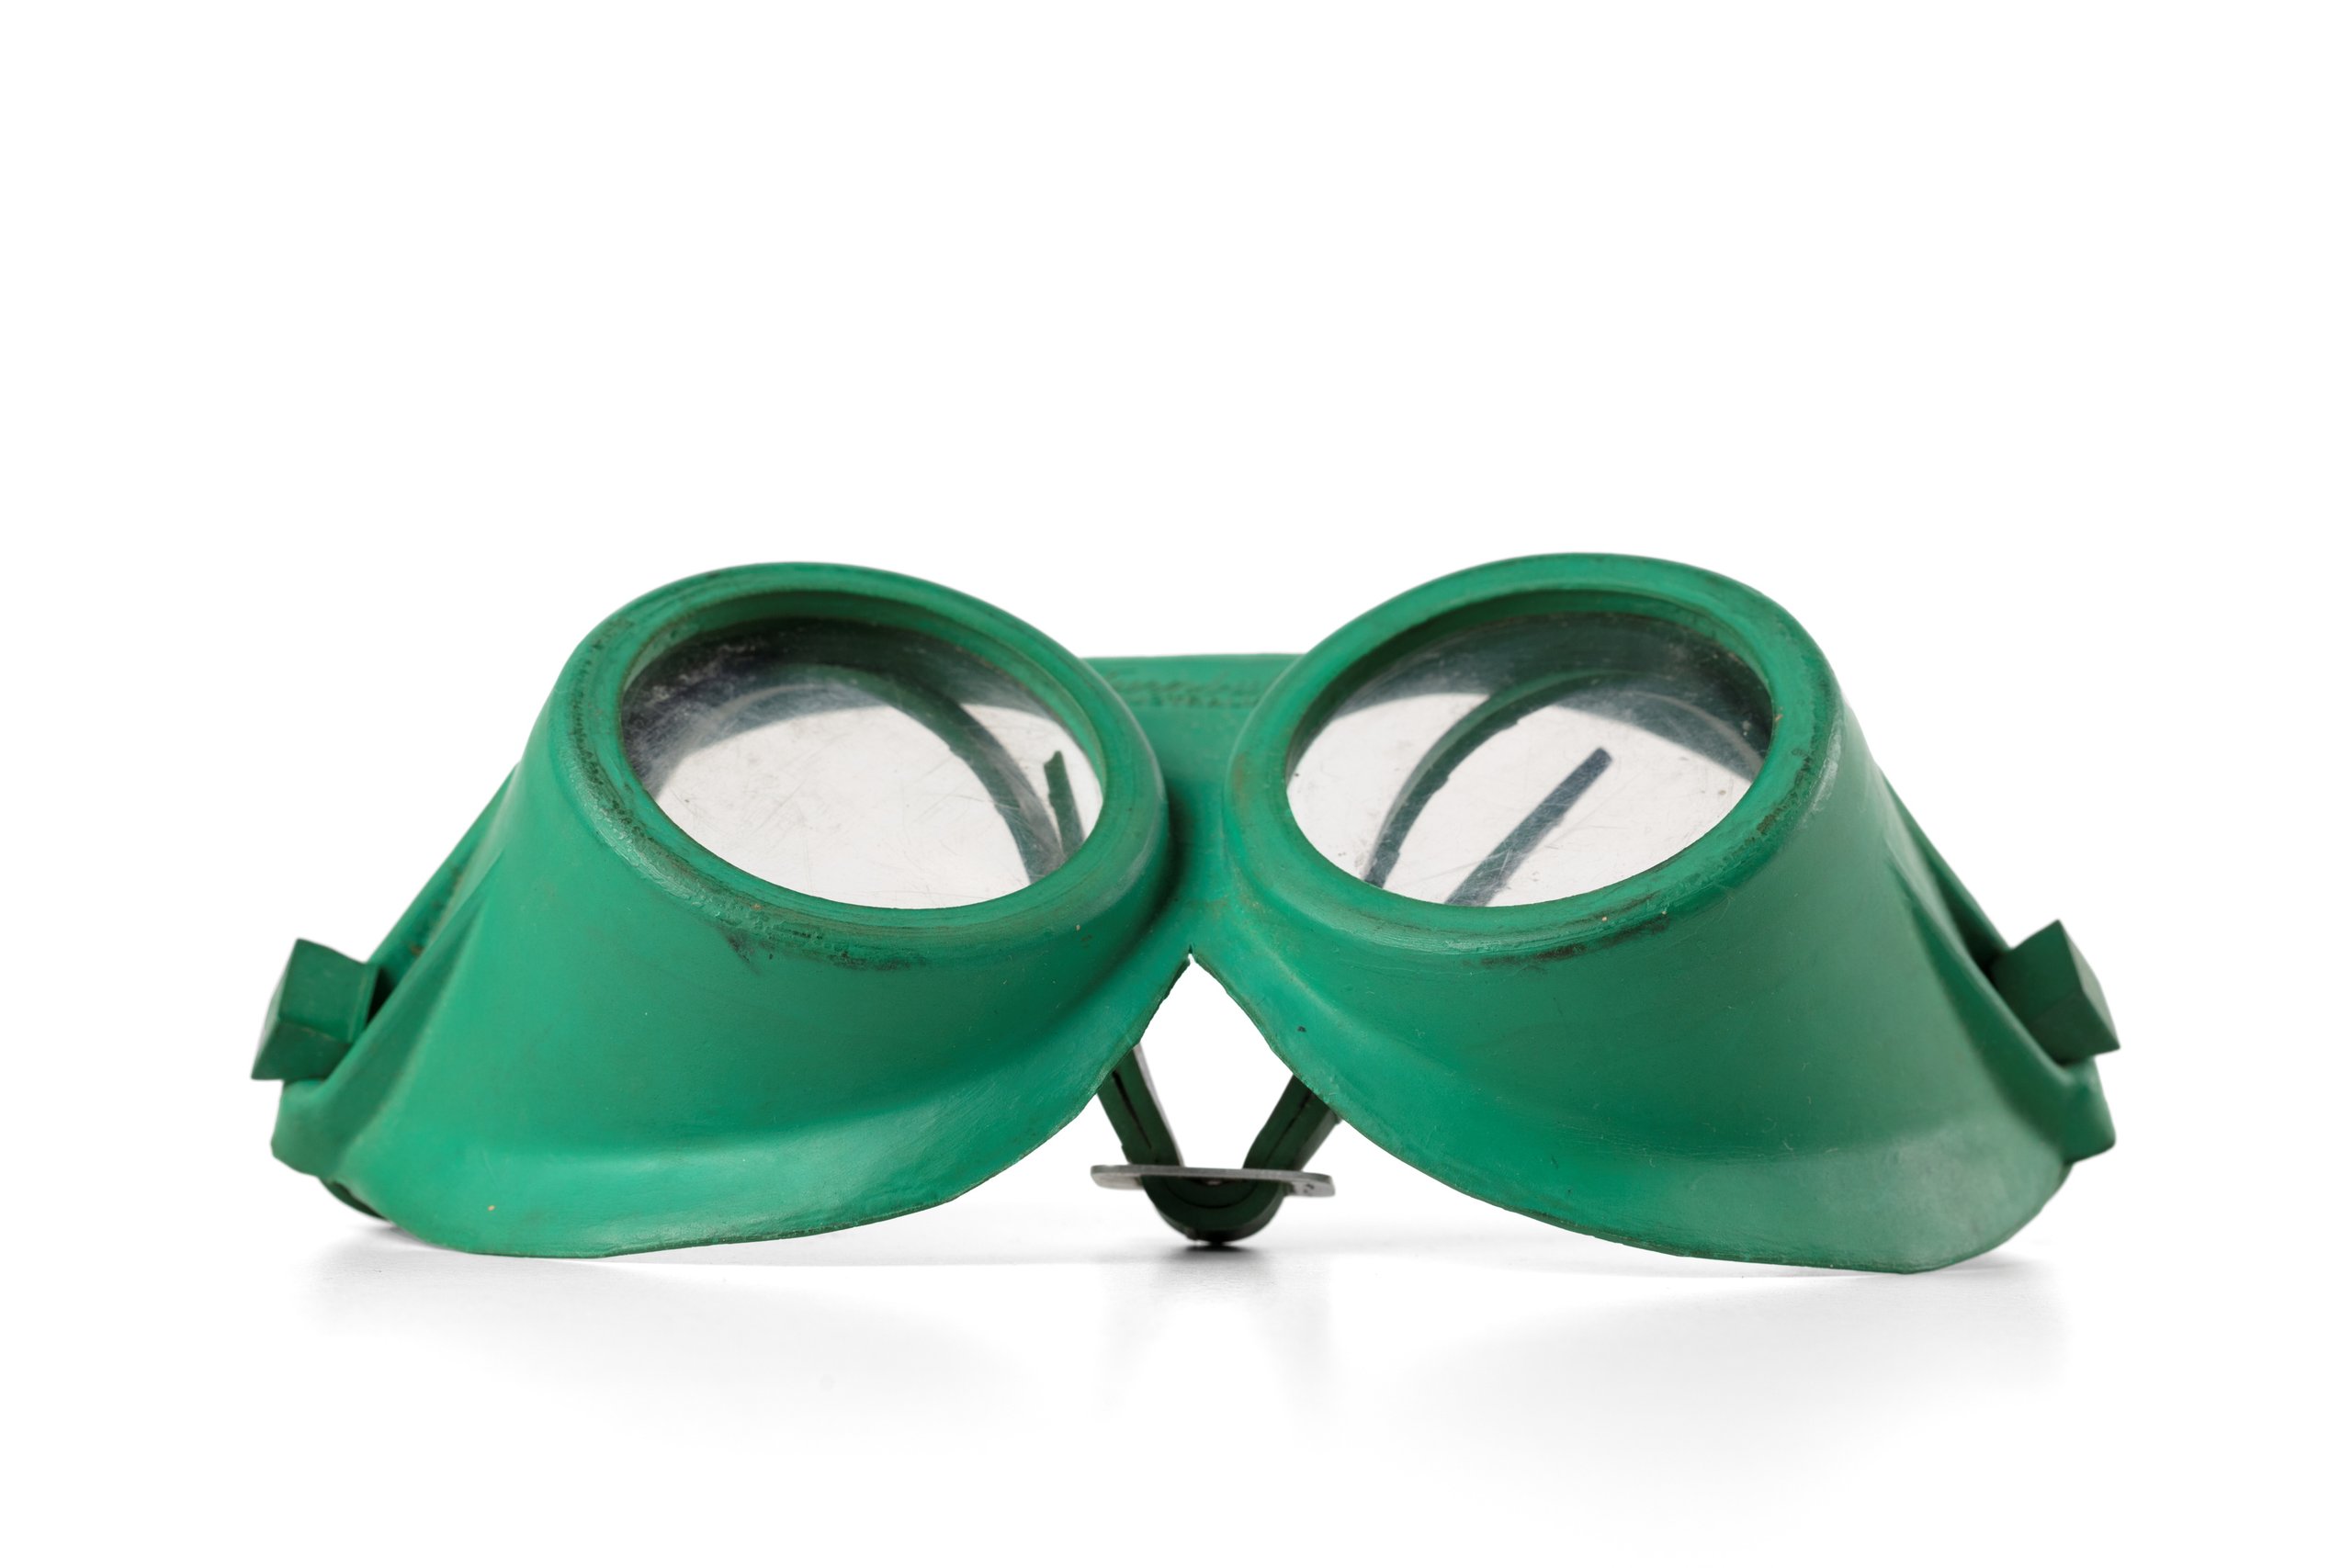 Childrens underwater goggles made by Turnbull